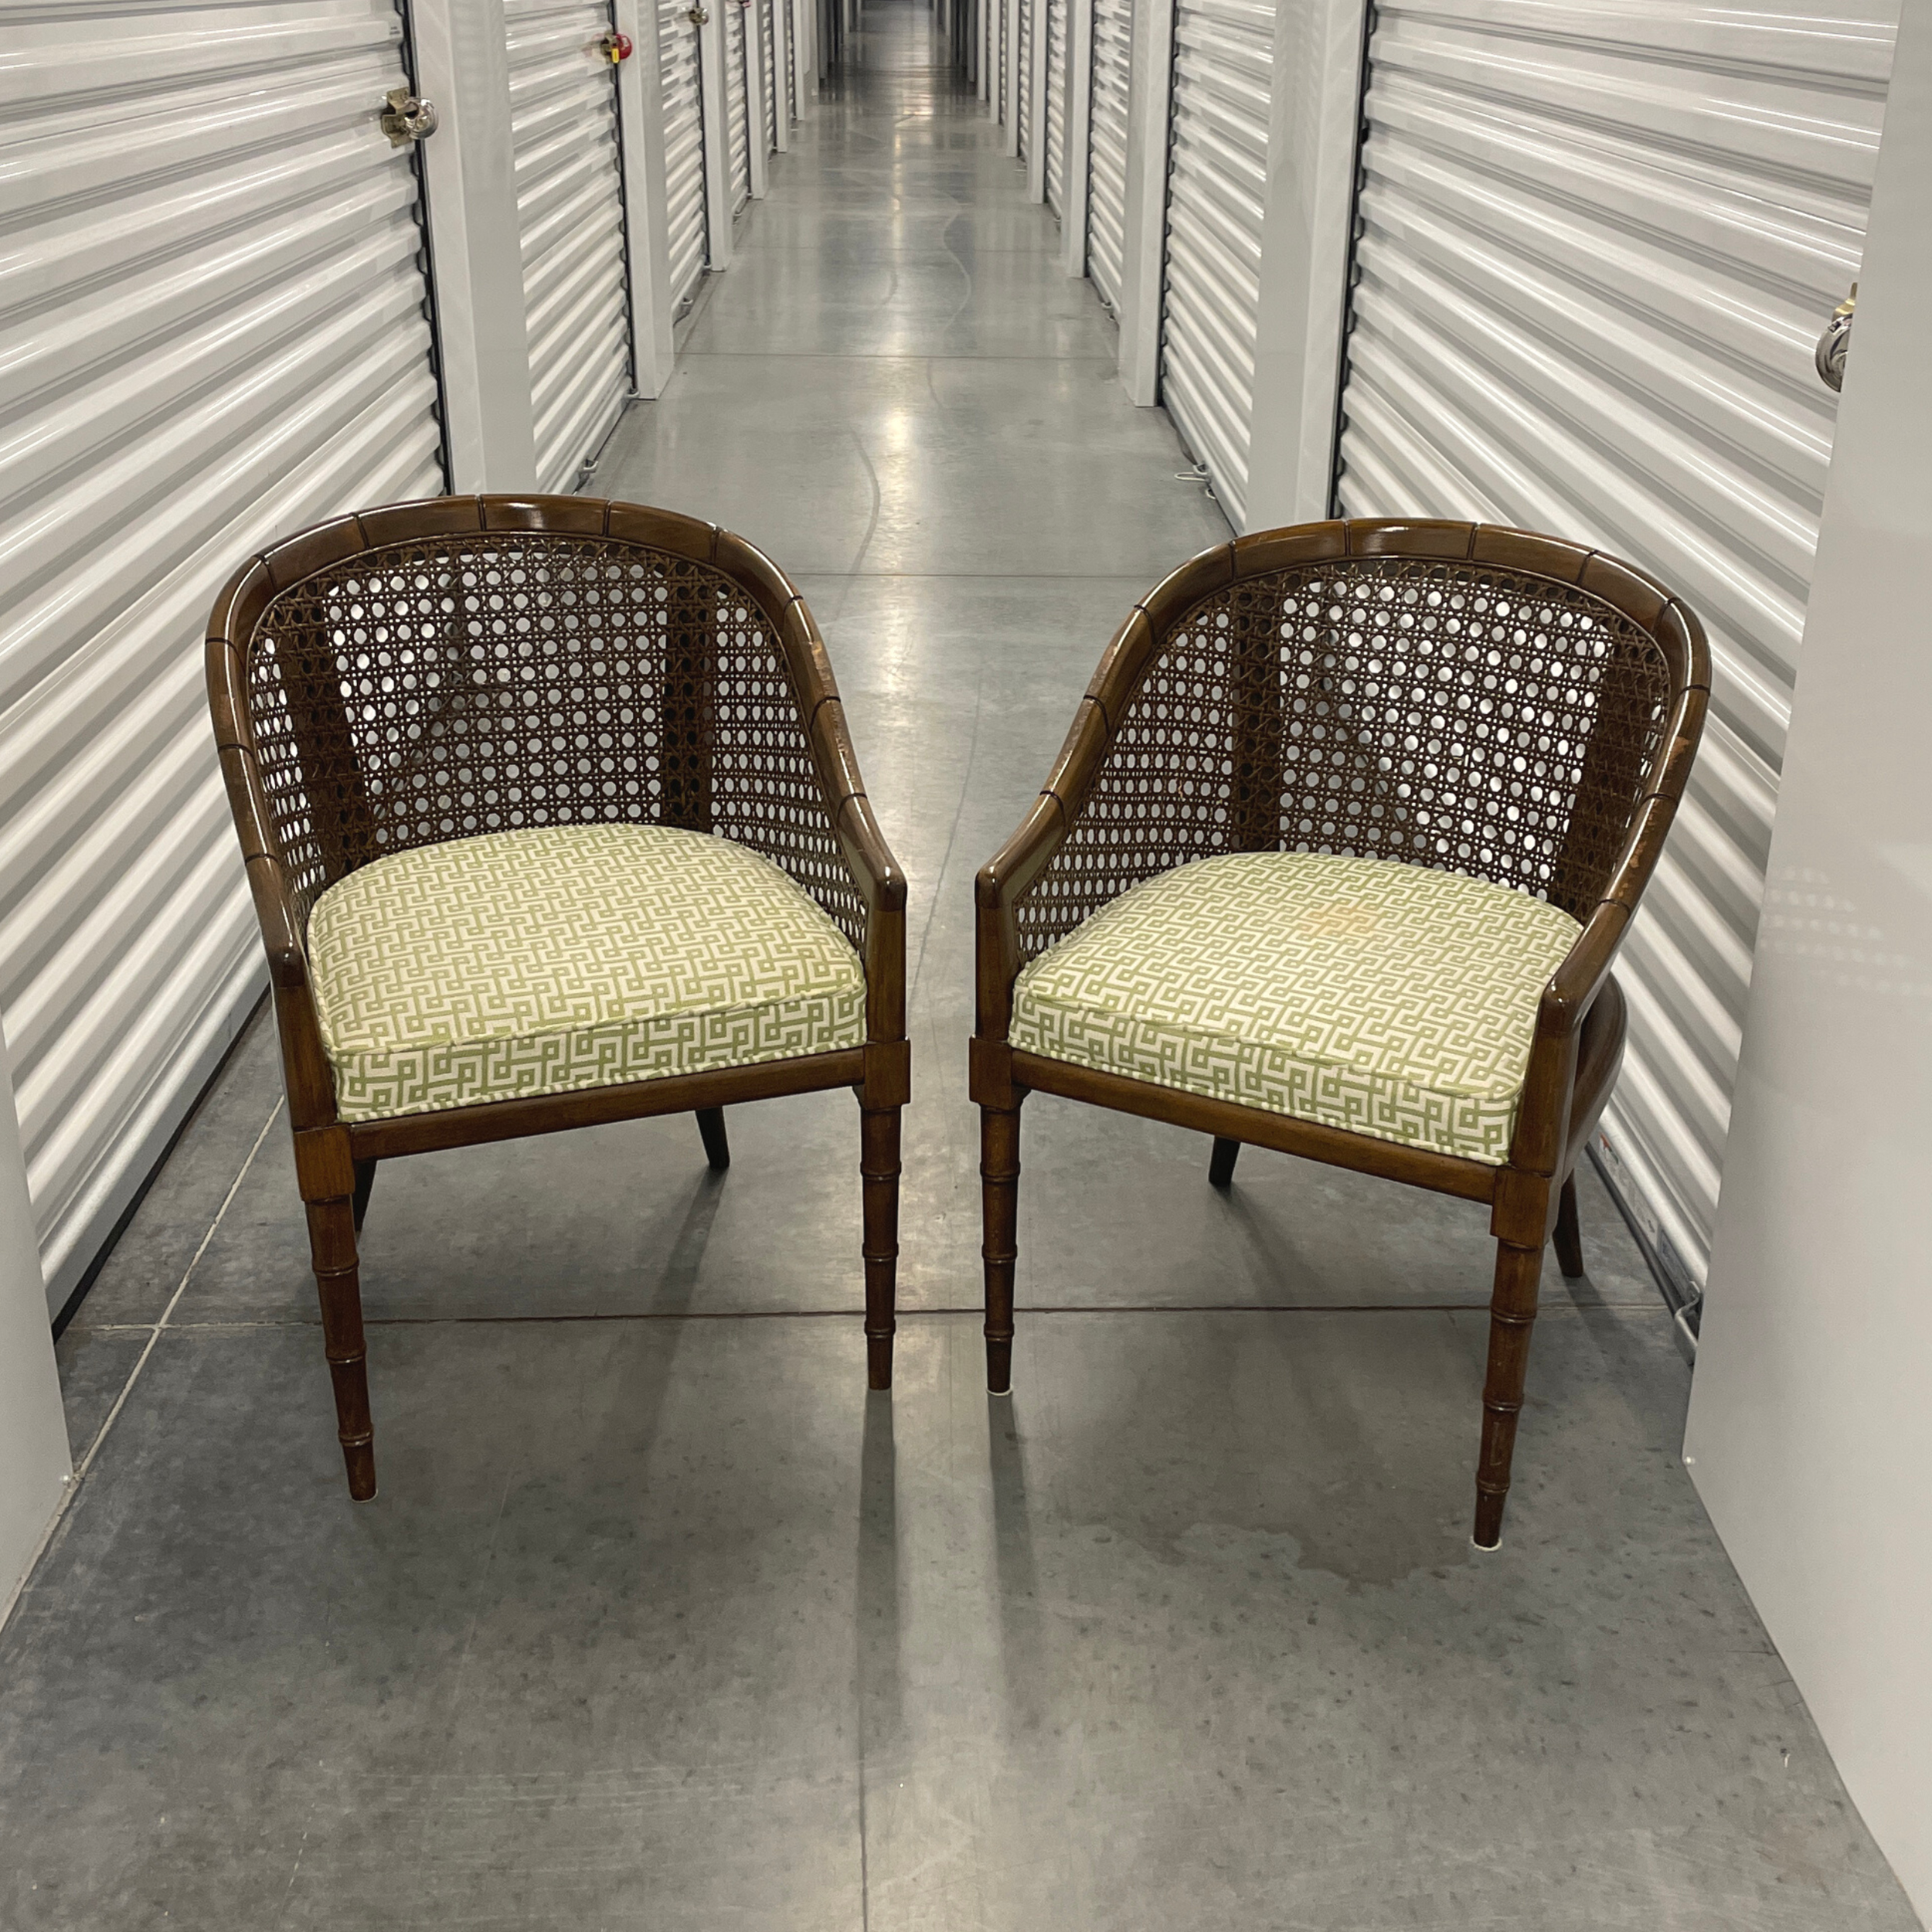 Cane Back Barrel Chairs, a pair